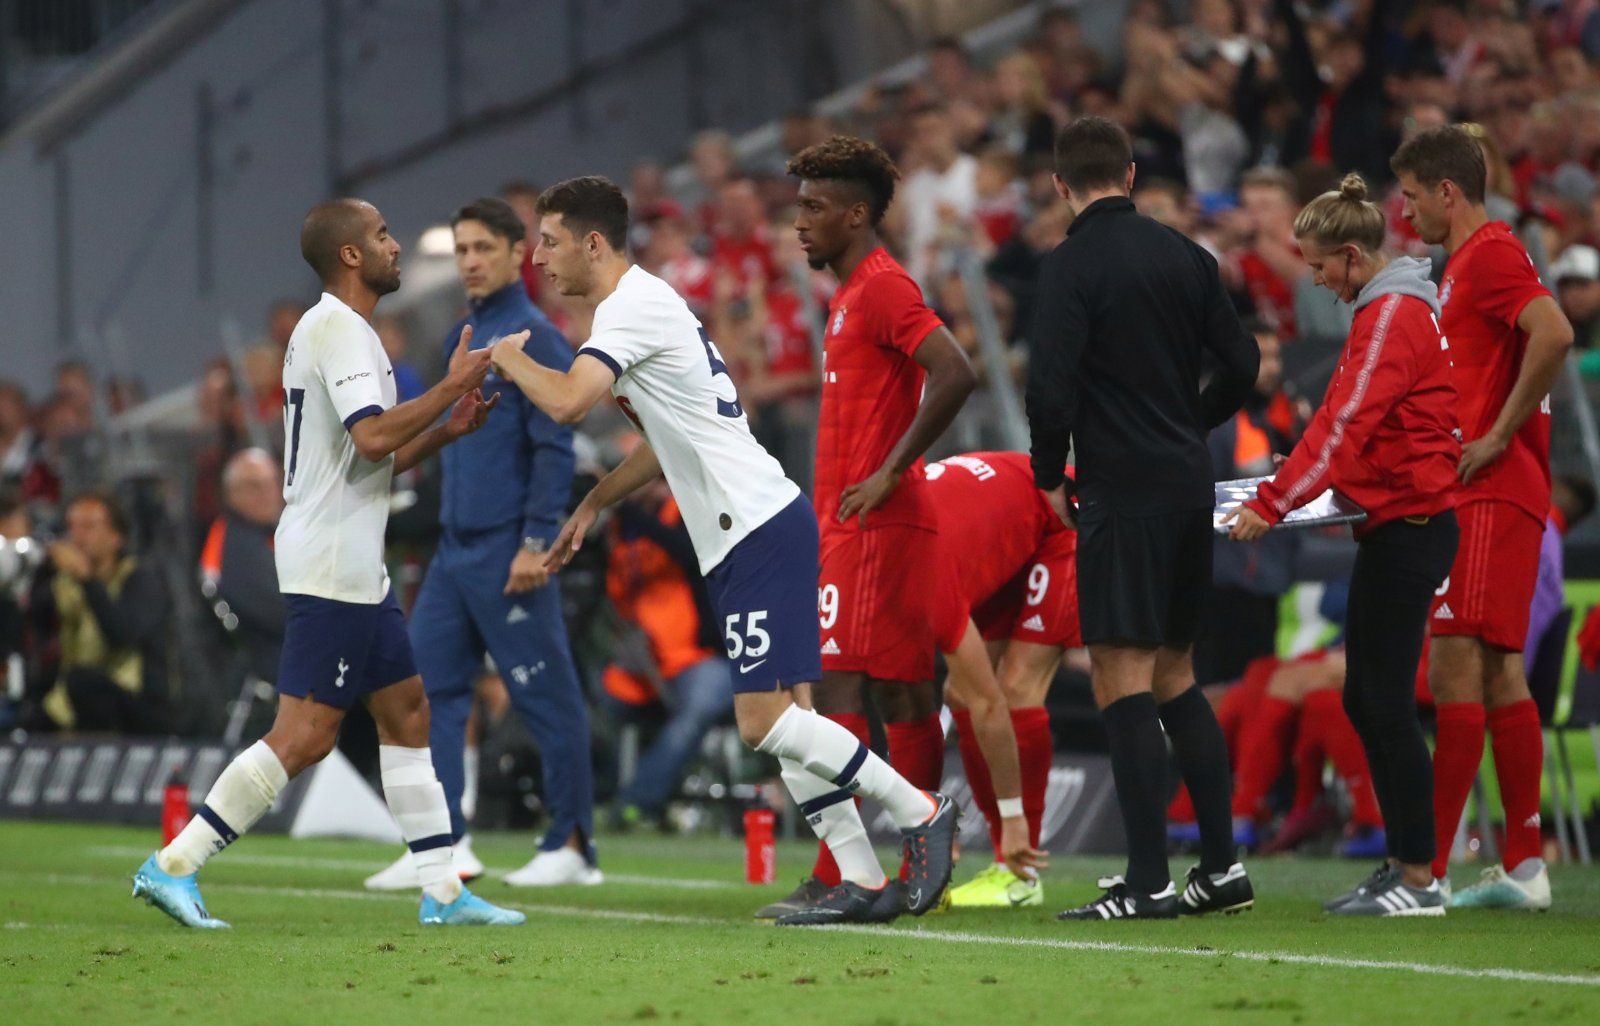 Tottenham's Jack Roles comes on as a substitute to replace Lucas Moura, Audi Cup v Bayern Munich, July 2019